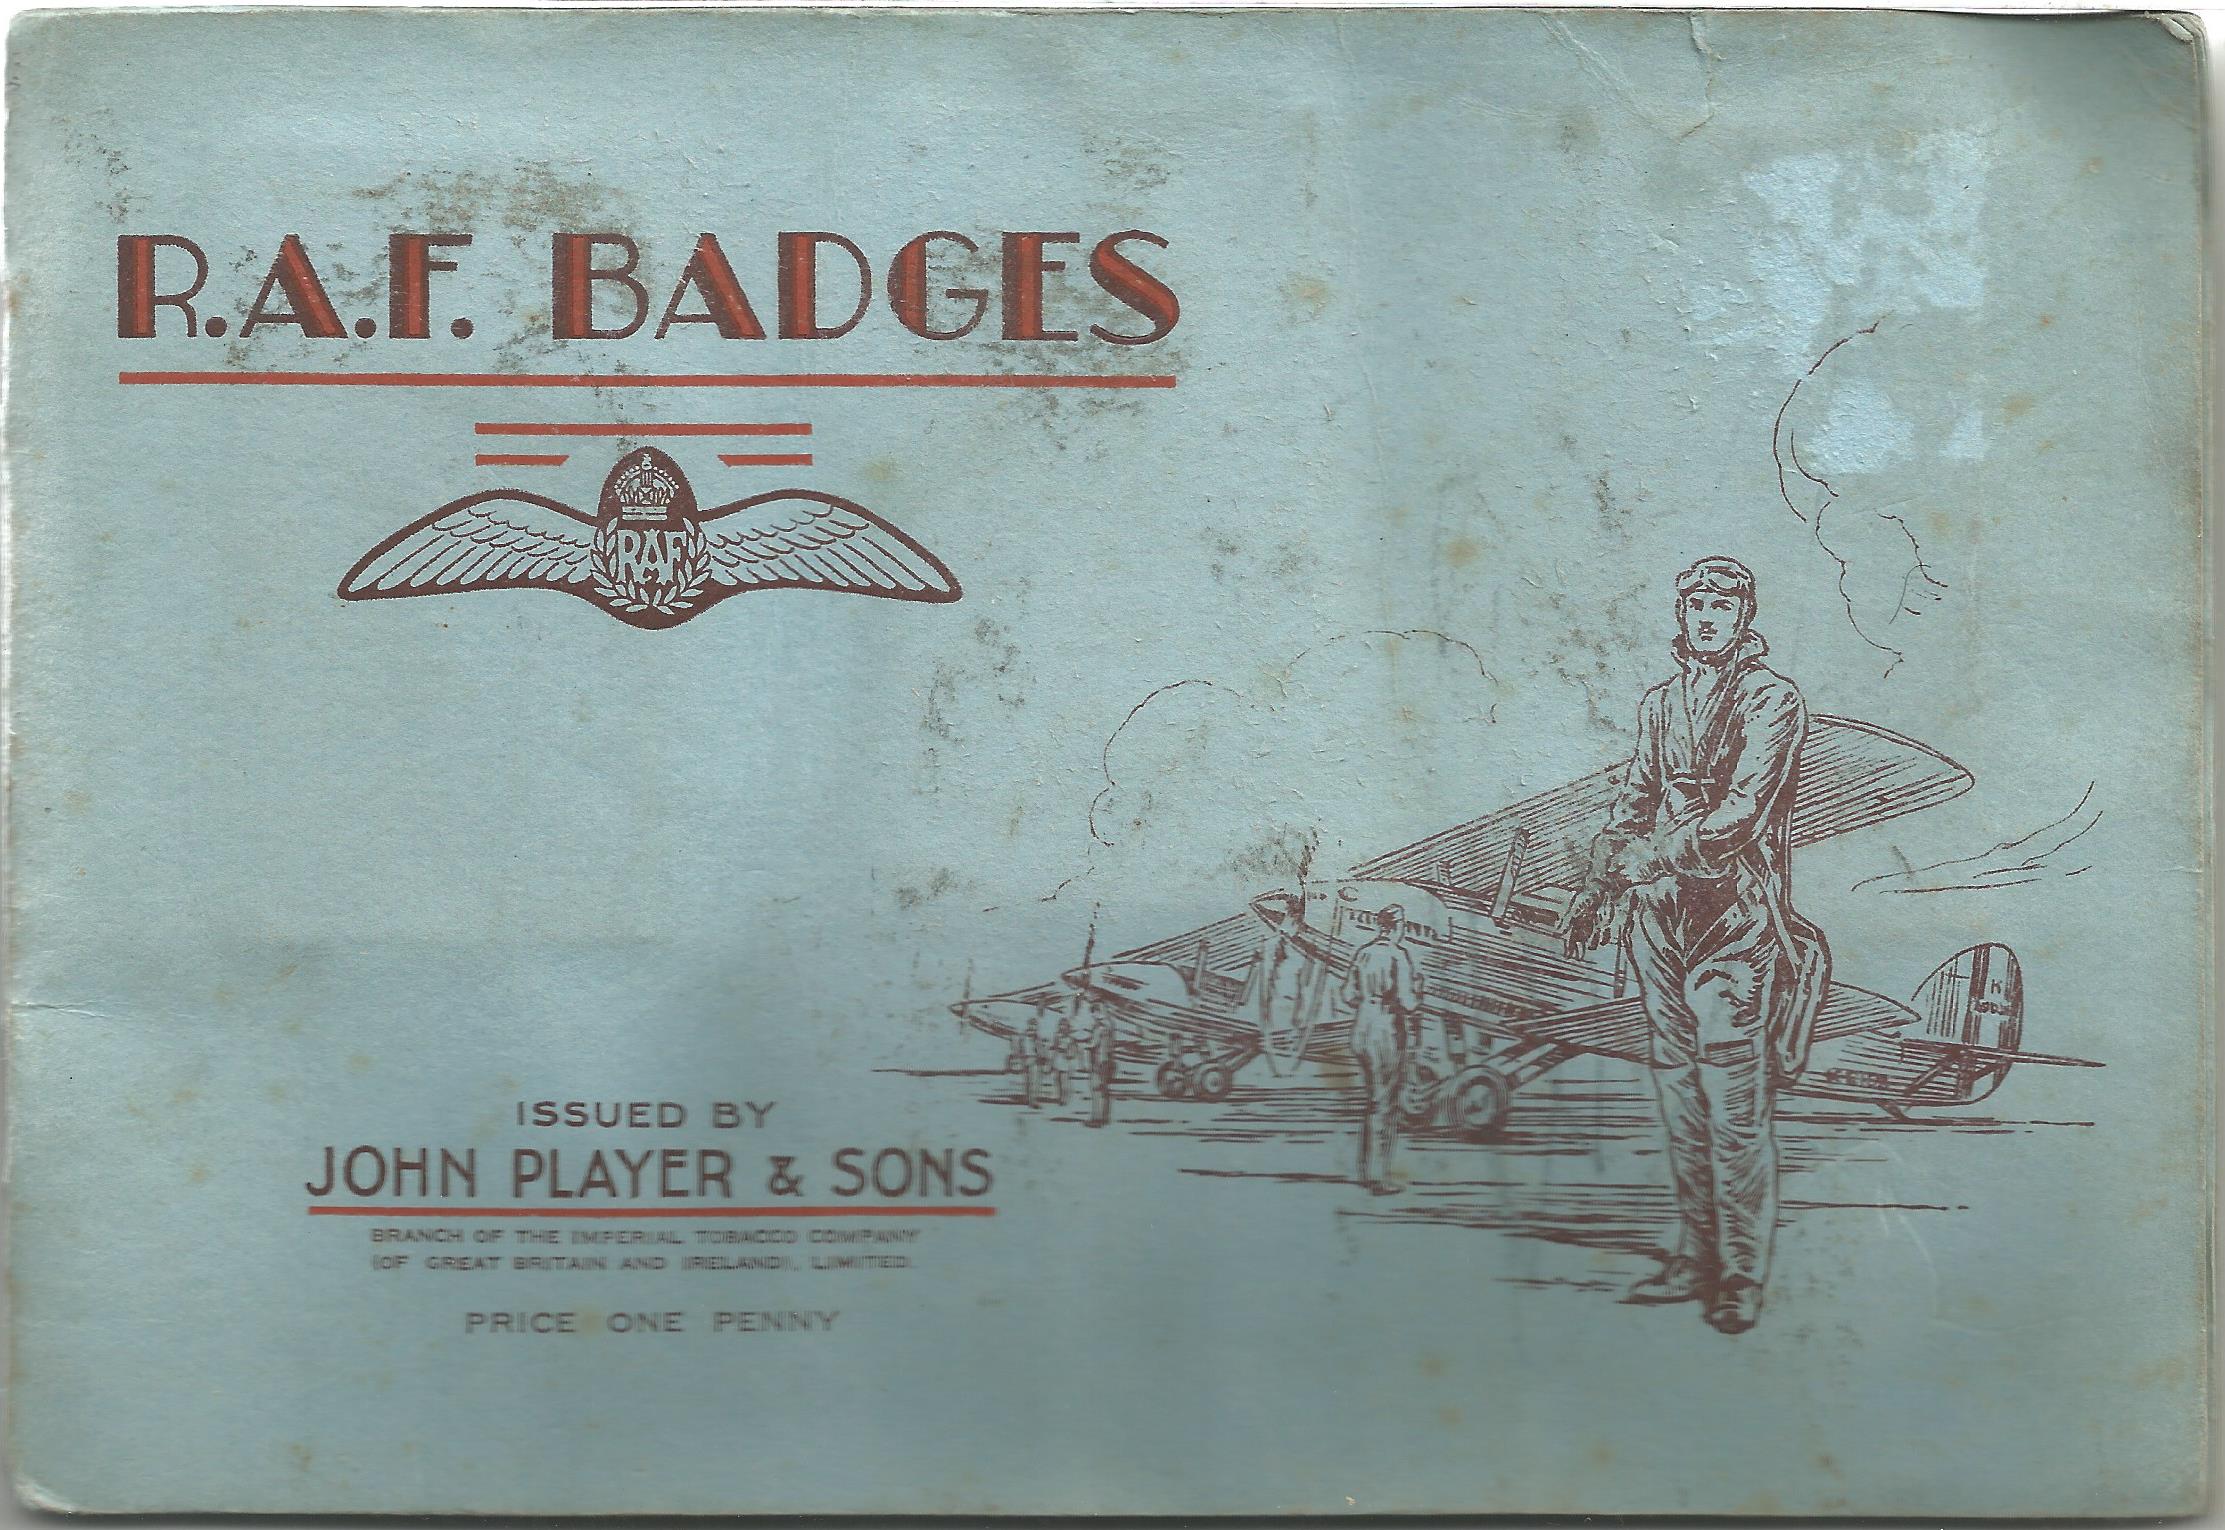 Player's Cigarette Cards, RAF Badges album, 1938, 50 cards. Good condition. We combine postage on